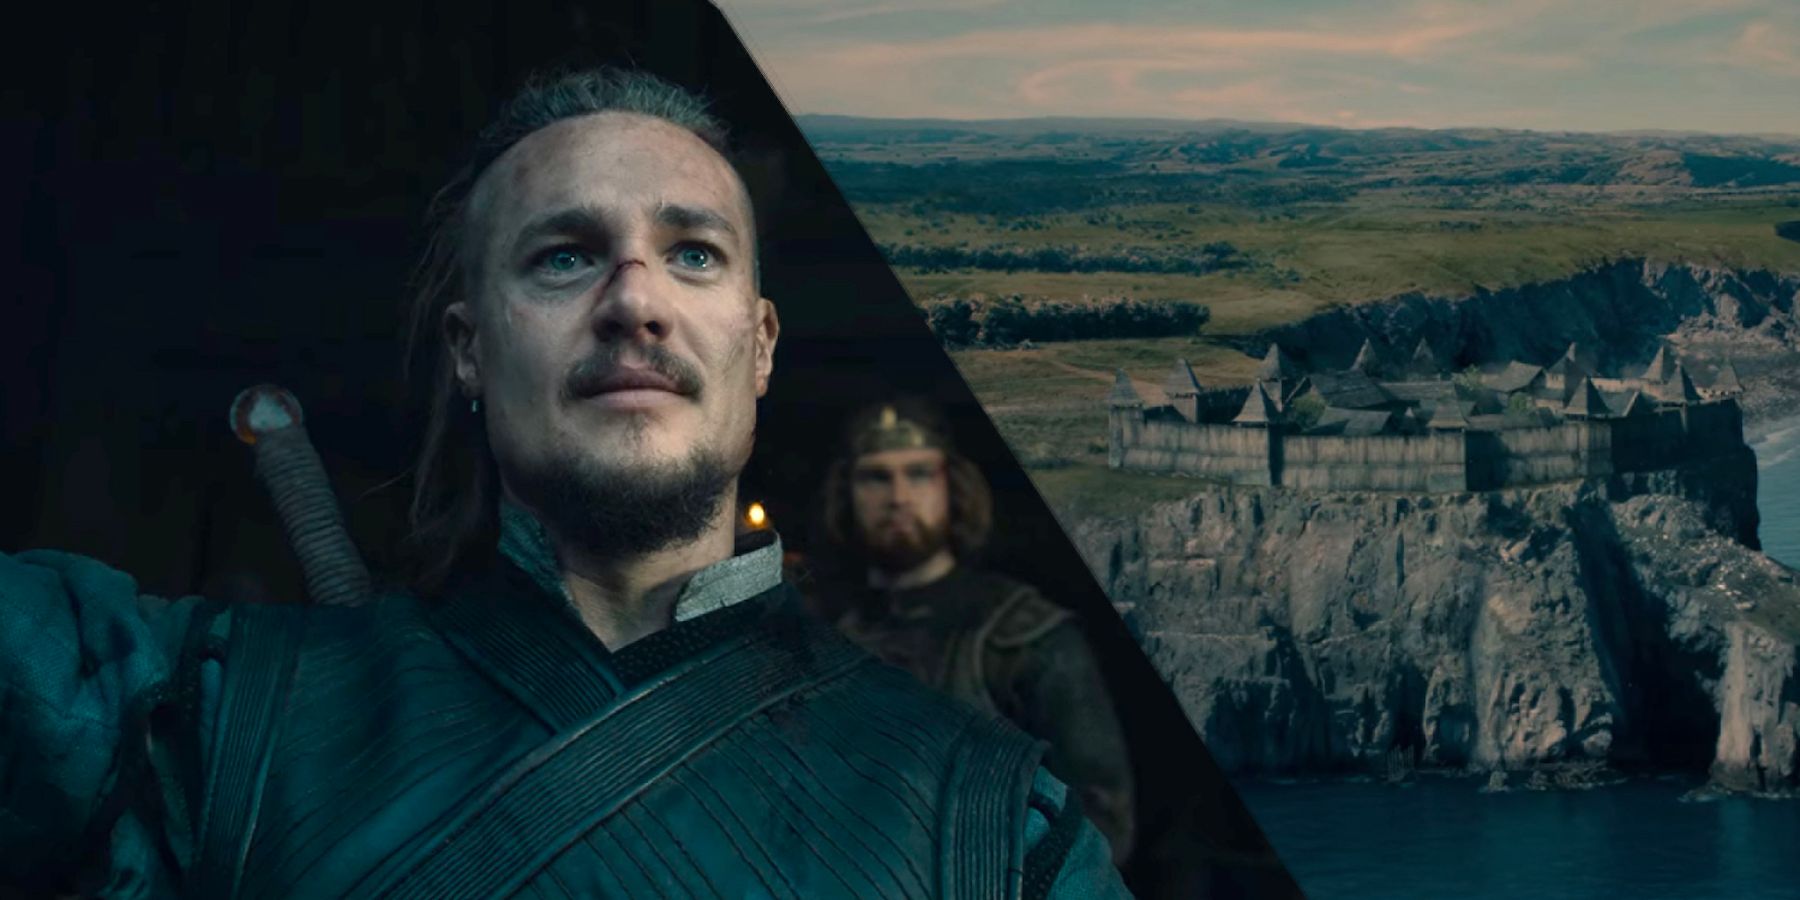 Uhtred with King Edward in background next to Bebbanburg